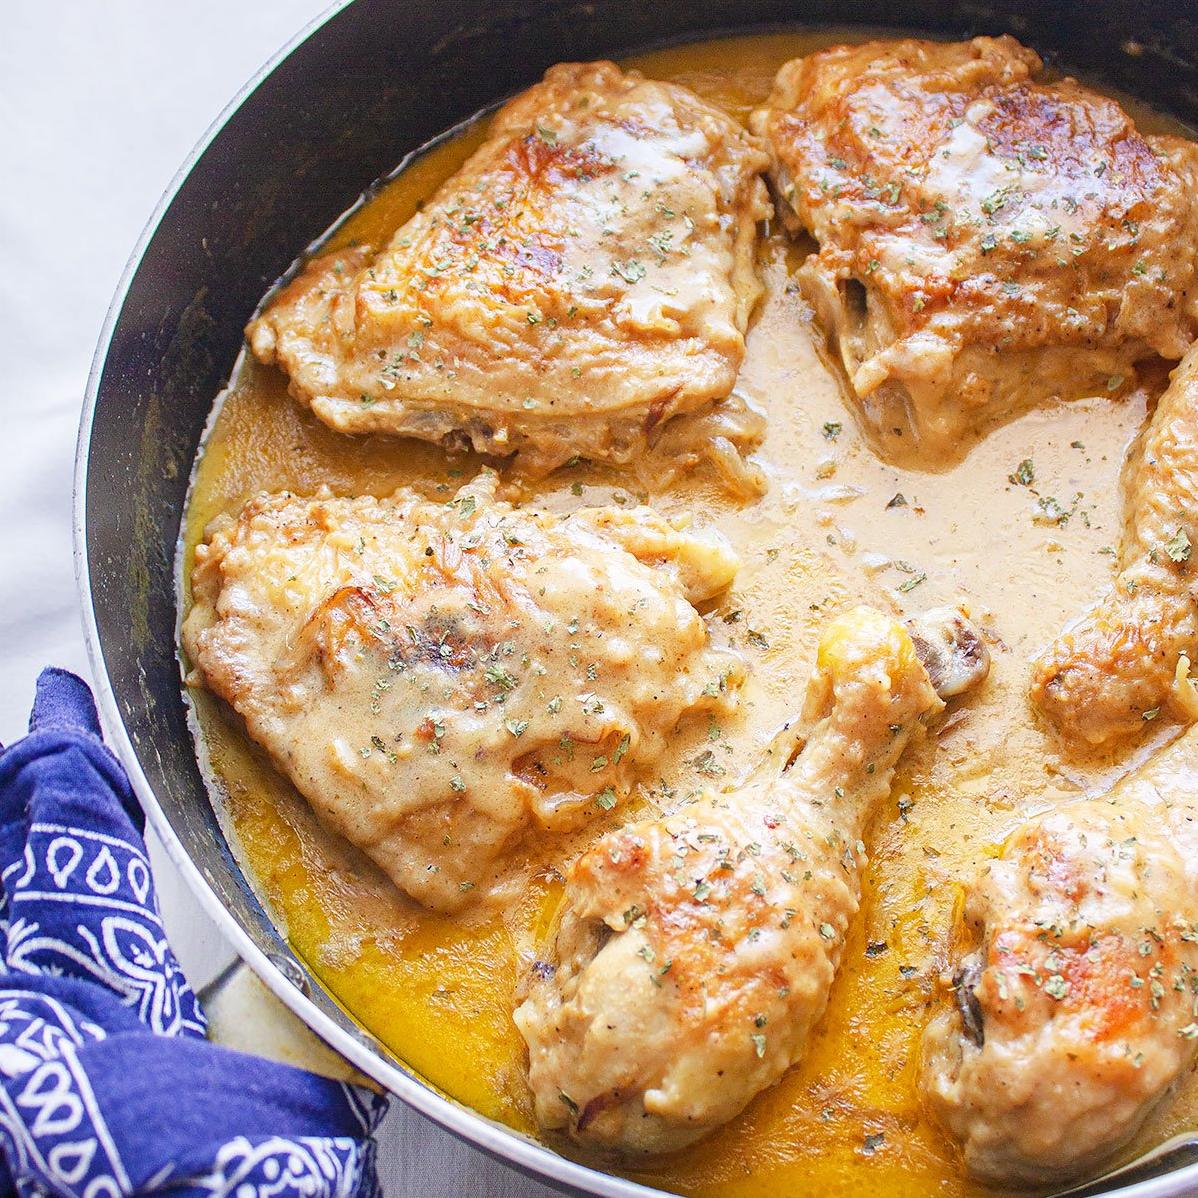  The ultimate comfort food with a twist of Southern flavor